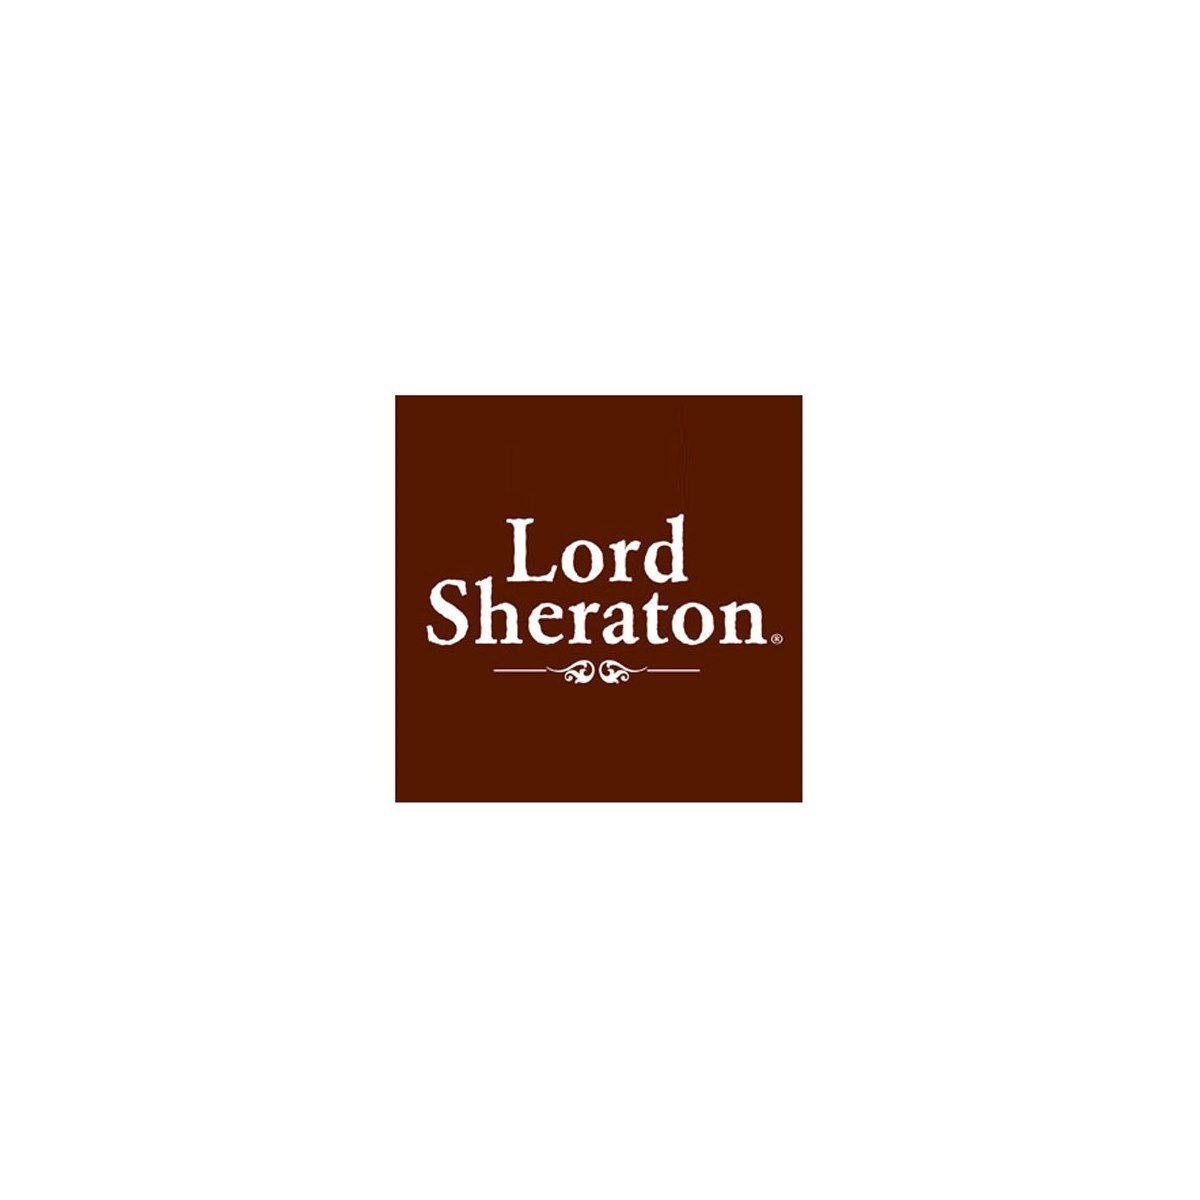 Where to Buy Lord Sheraton Products